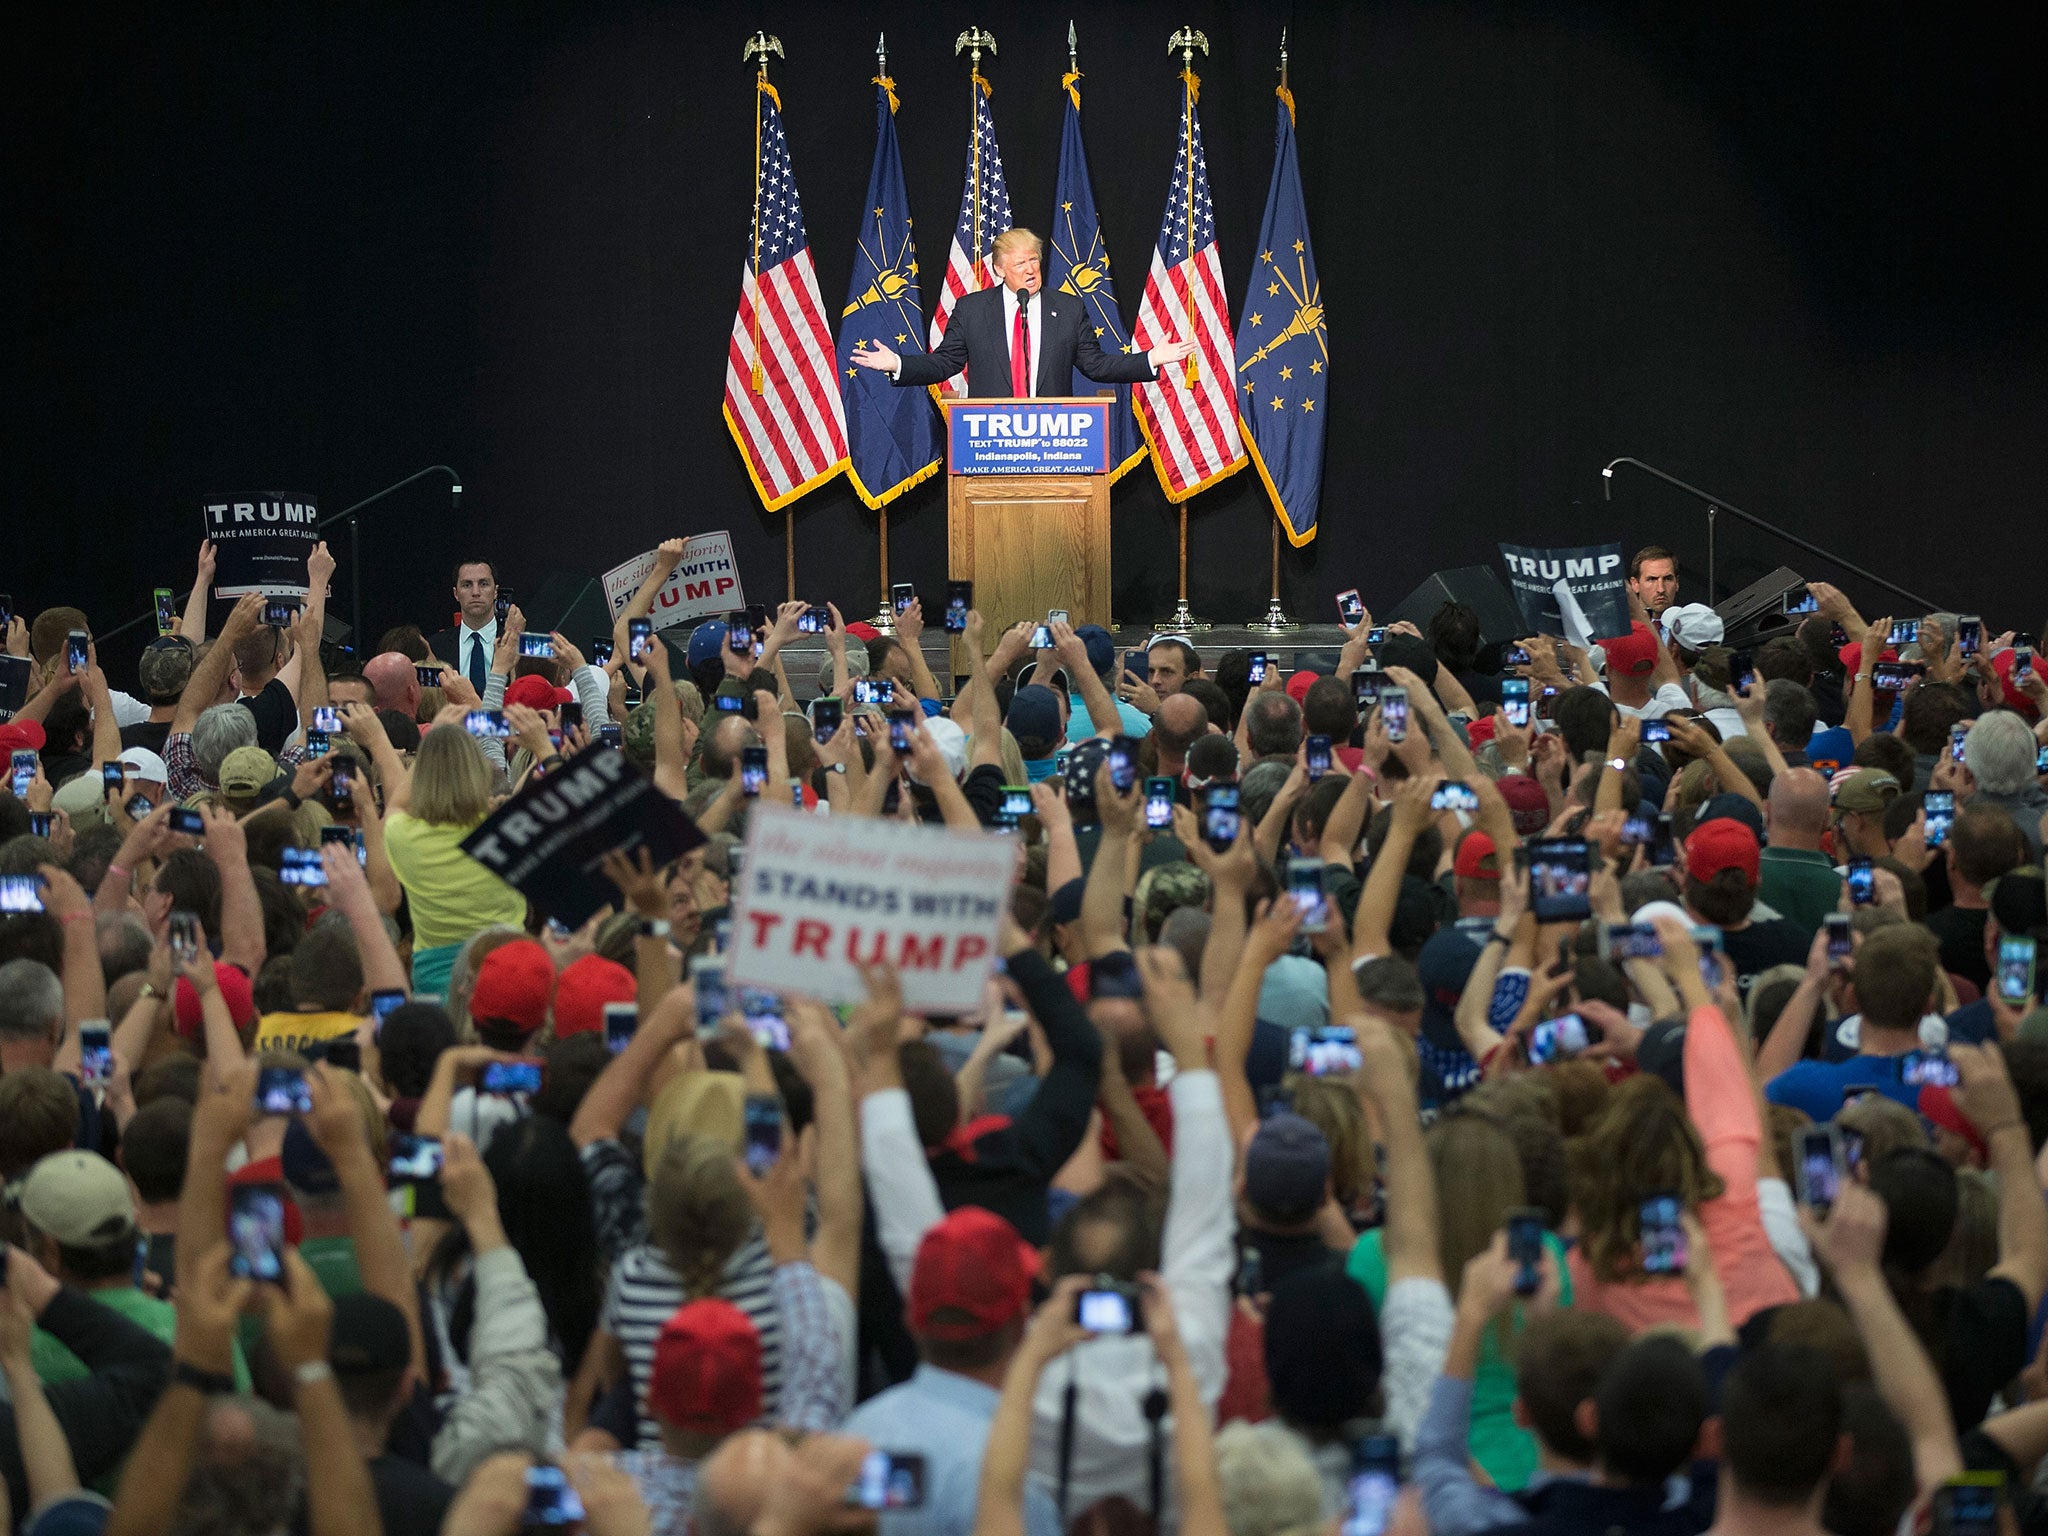 Trump speaks to supporters during a rally in Indiana